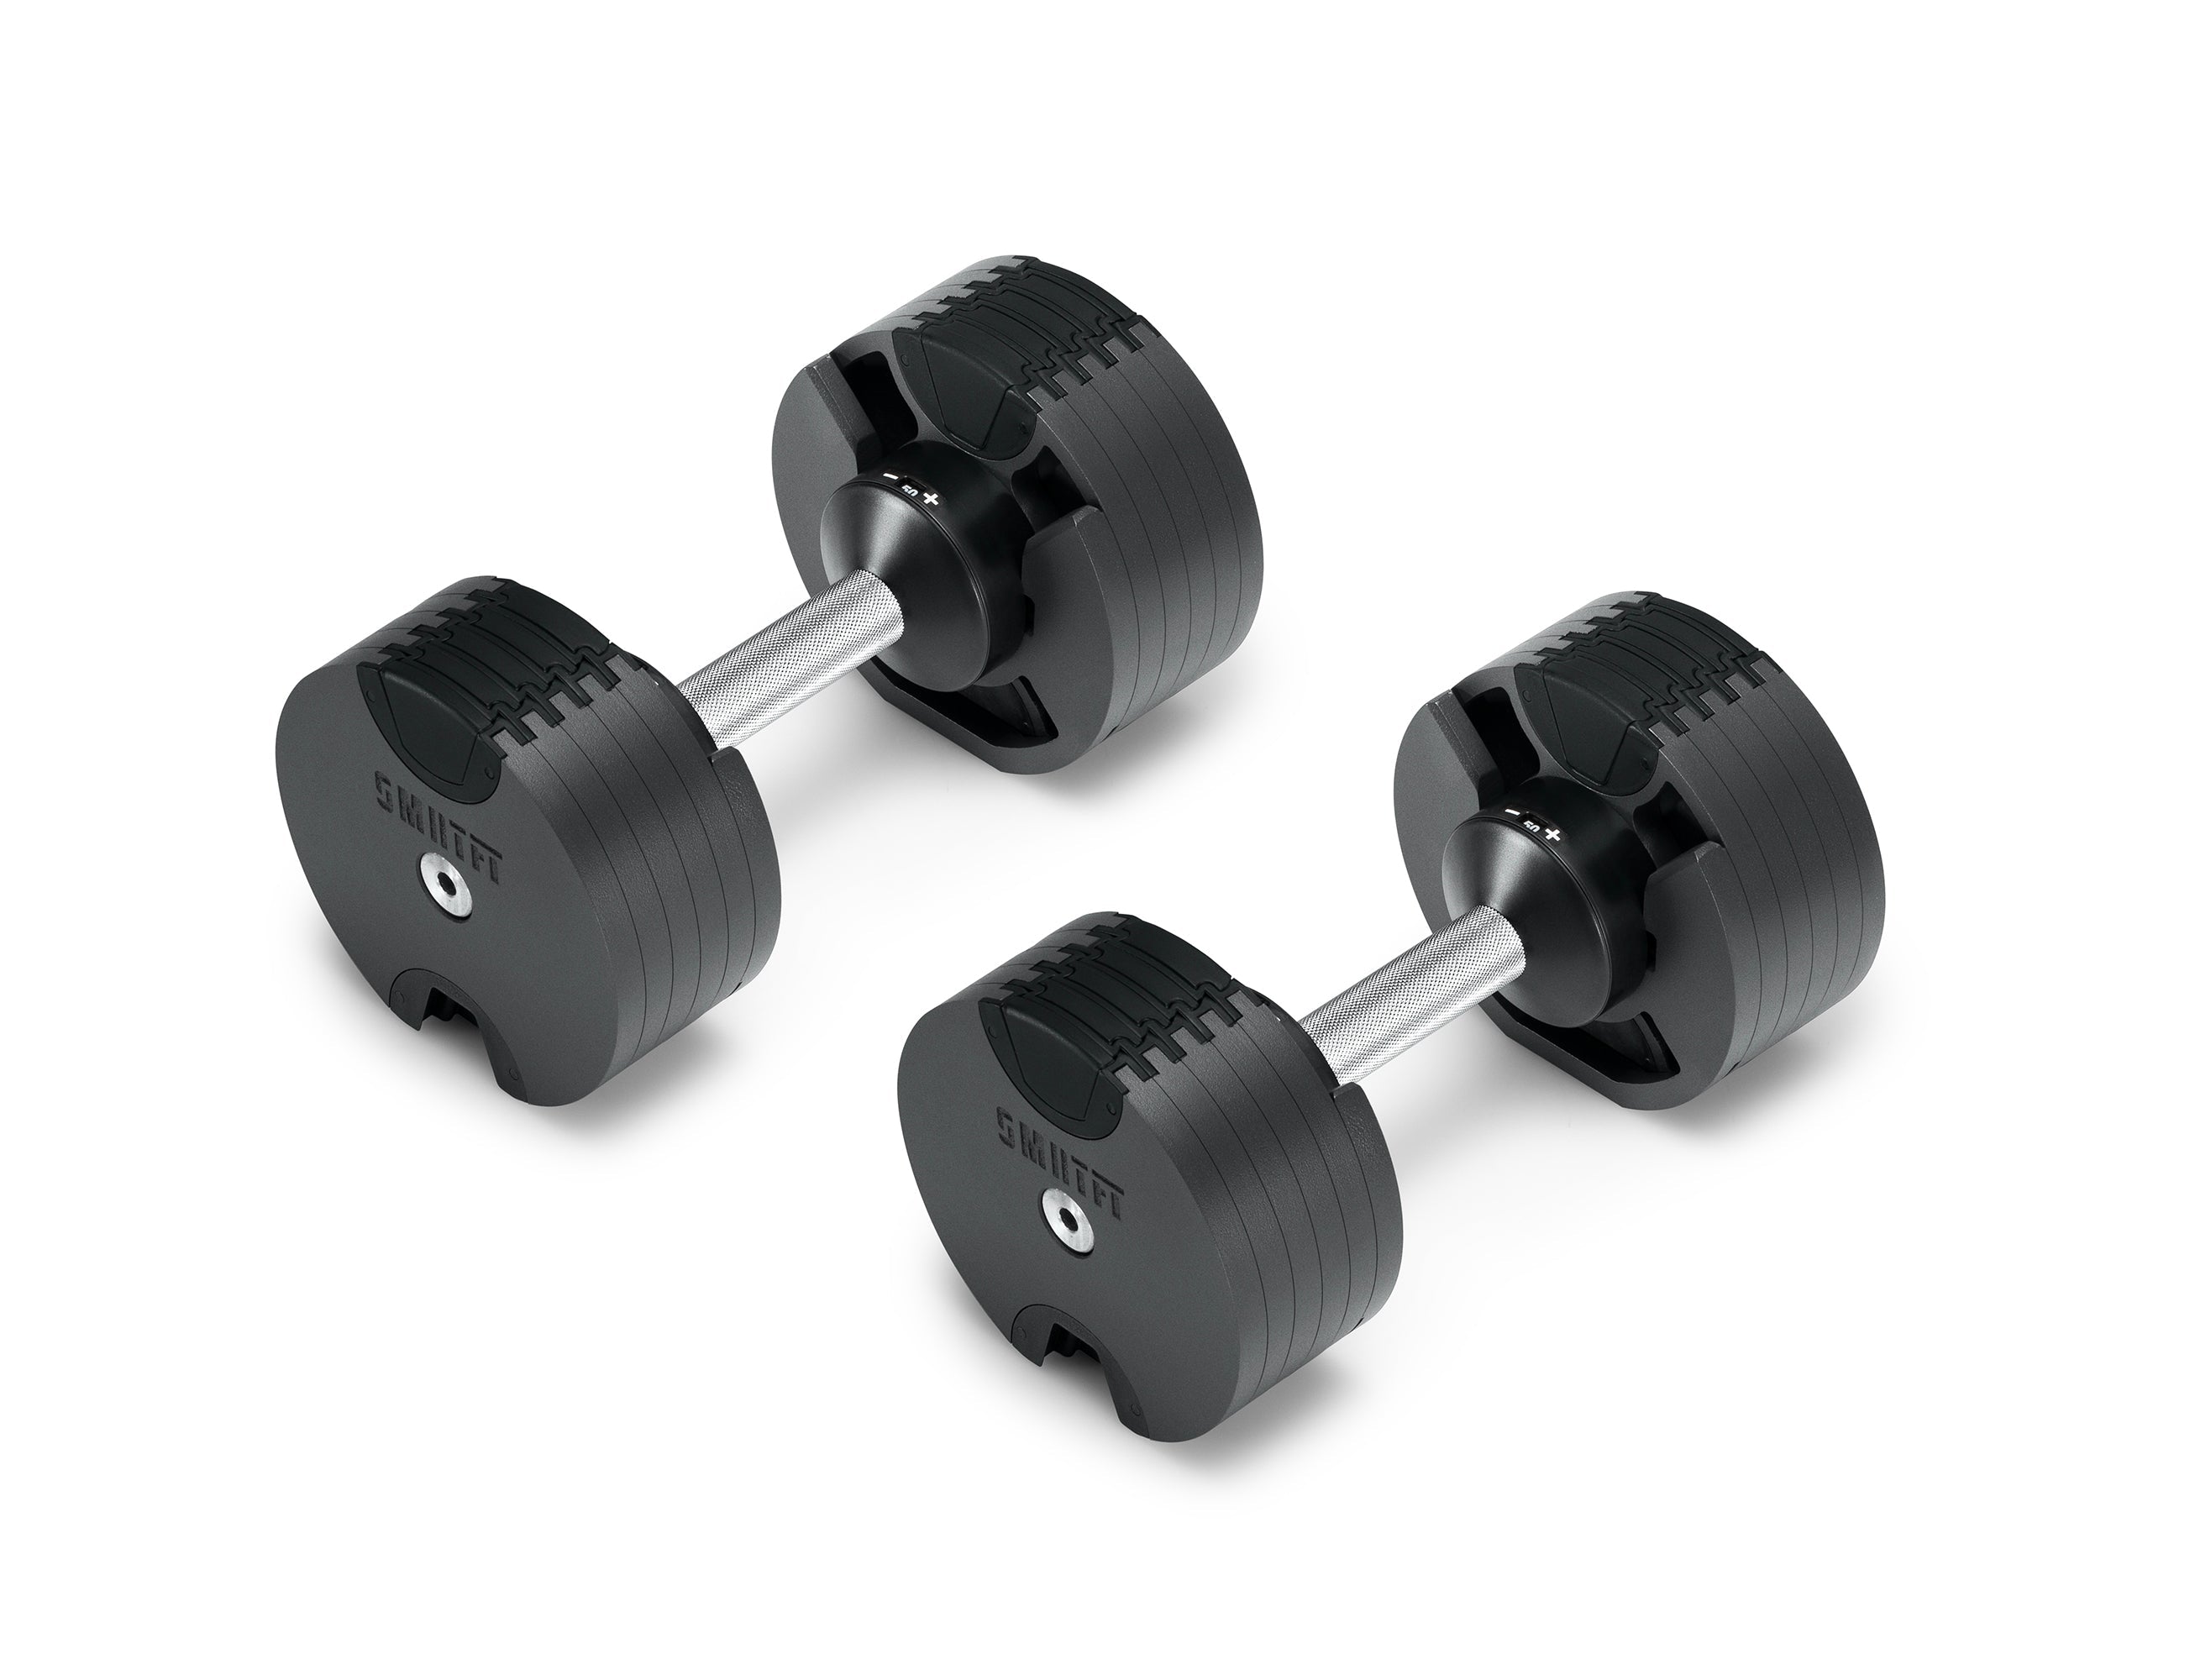 New Black 50 lbs Dumbbells Created By SMRTFT